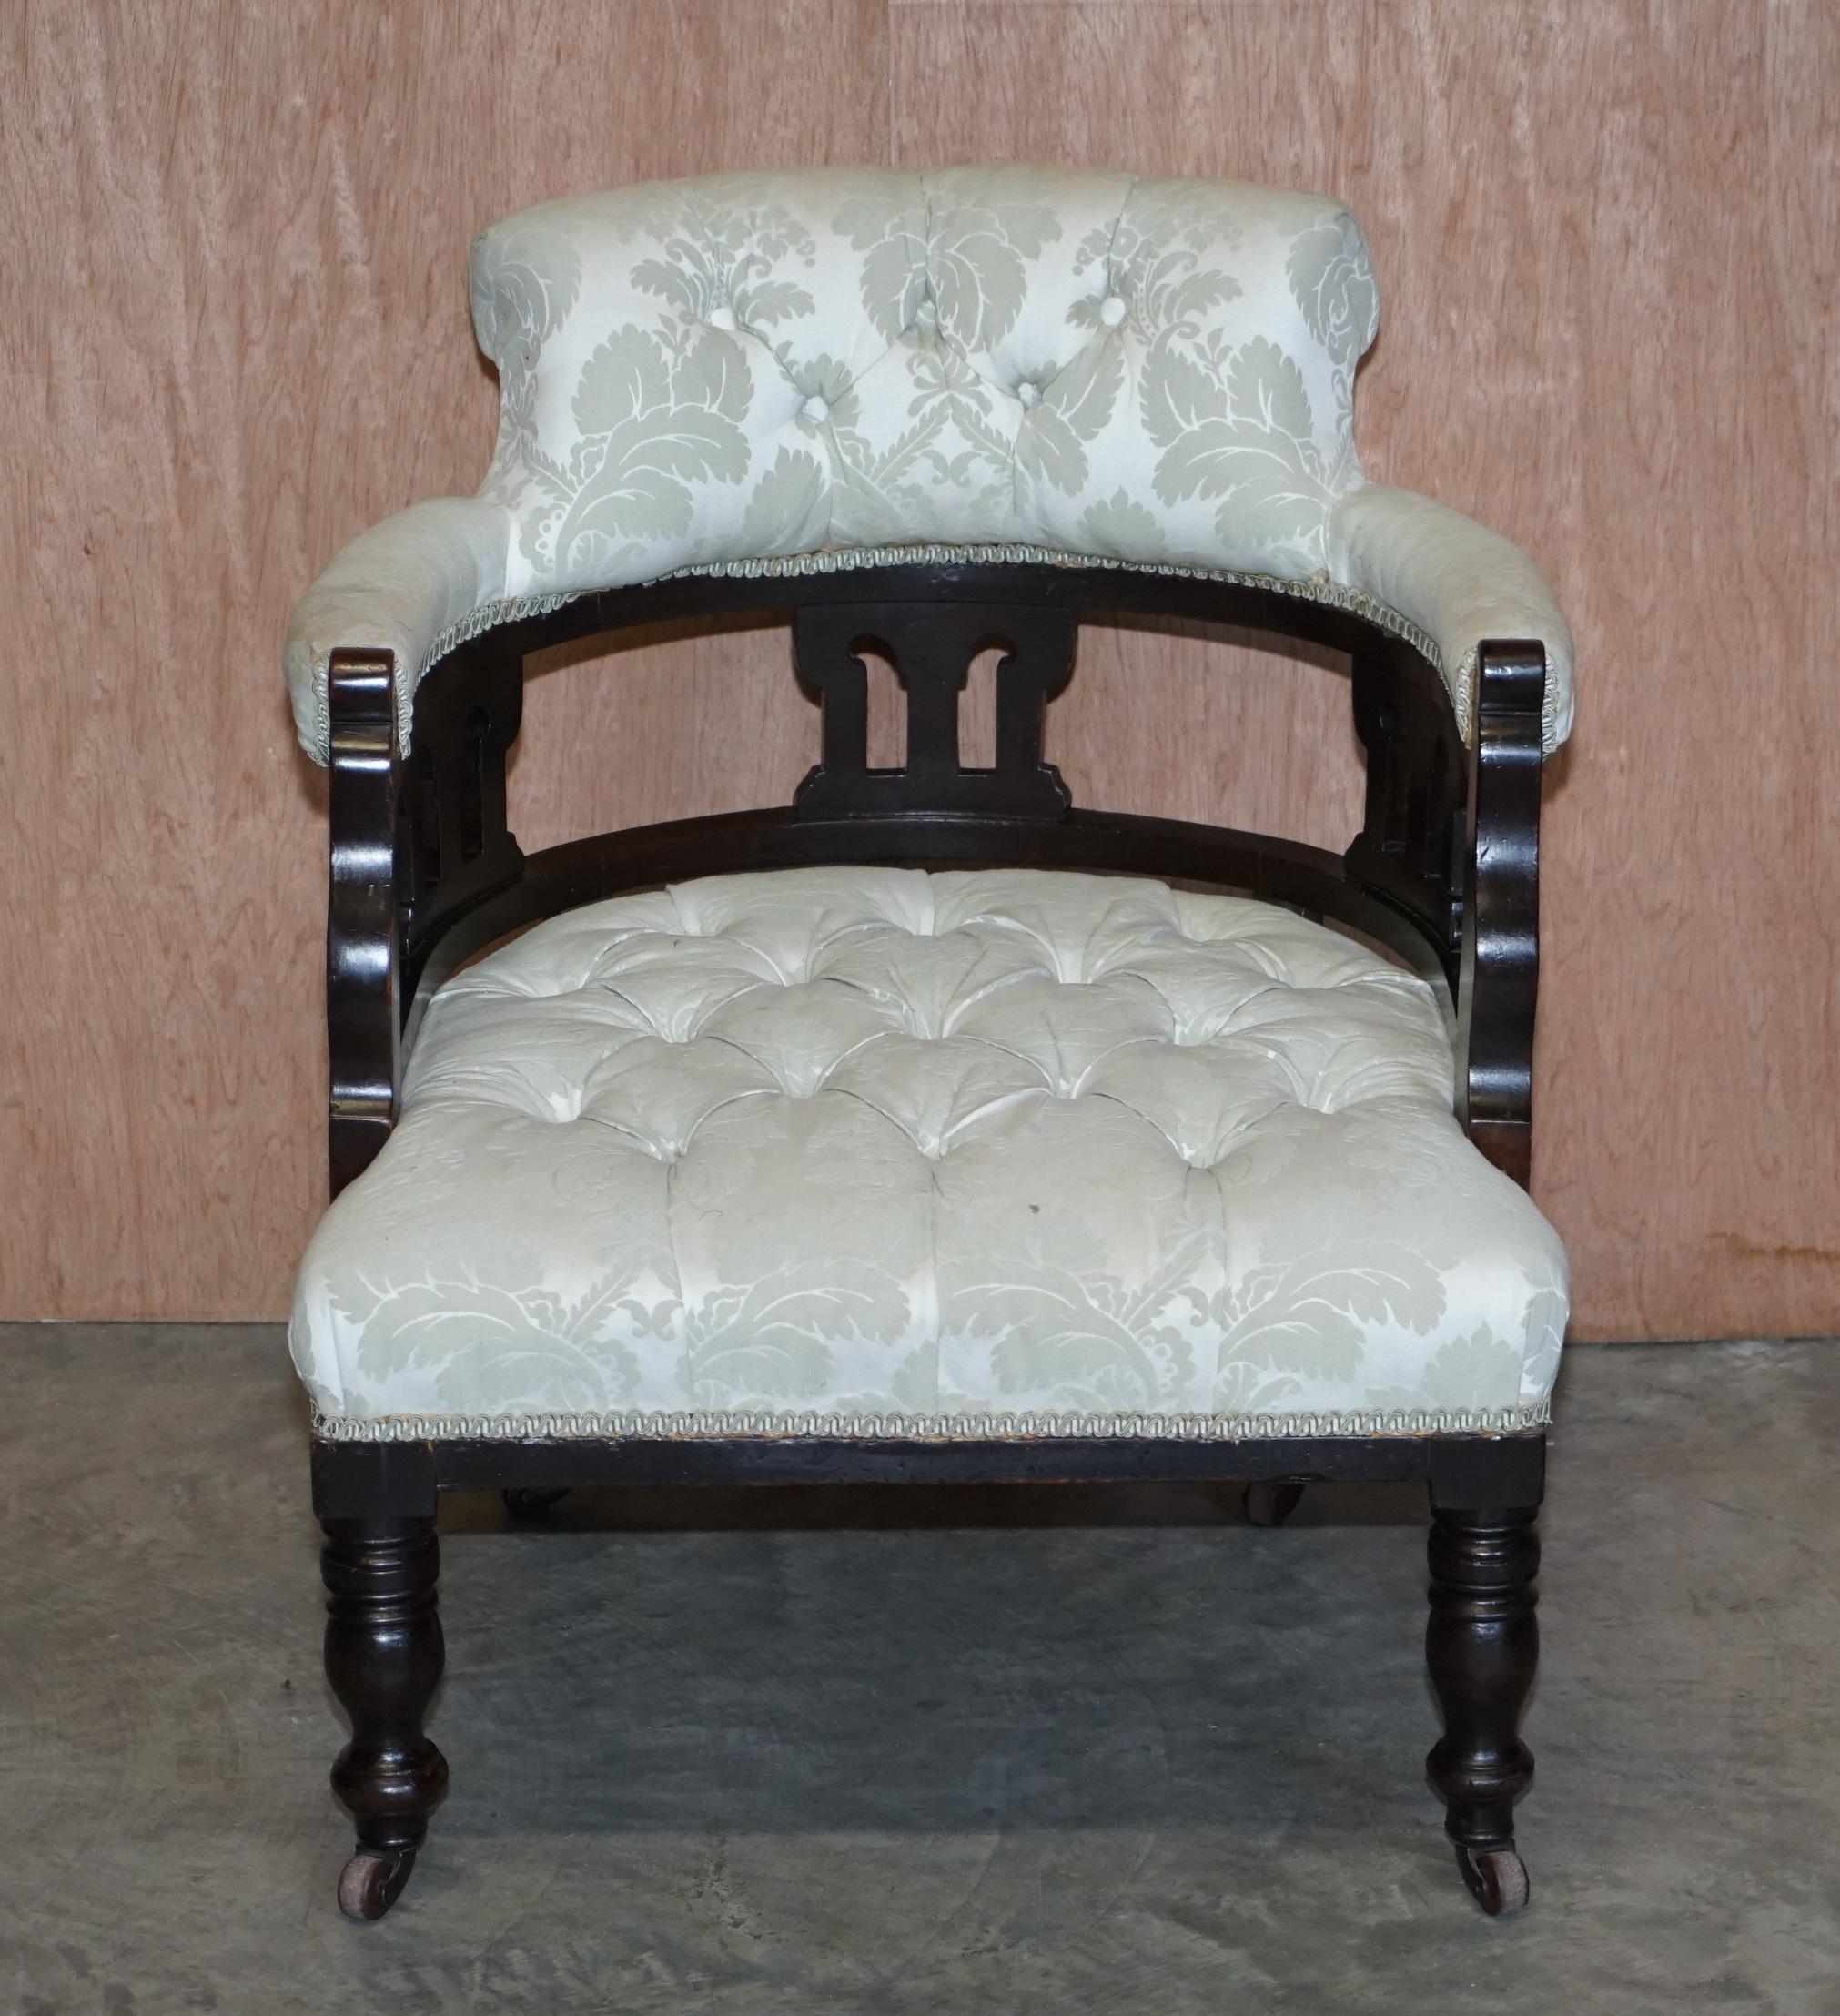 We are delighted to offer for sale this lovely original circa 1880 Victorian occasional captains armchair

A very good looking period piece, upholstered in fabric with chesterfield buttoning, the form is that of a Library reading occasional